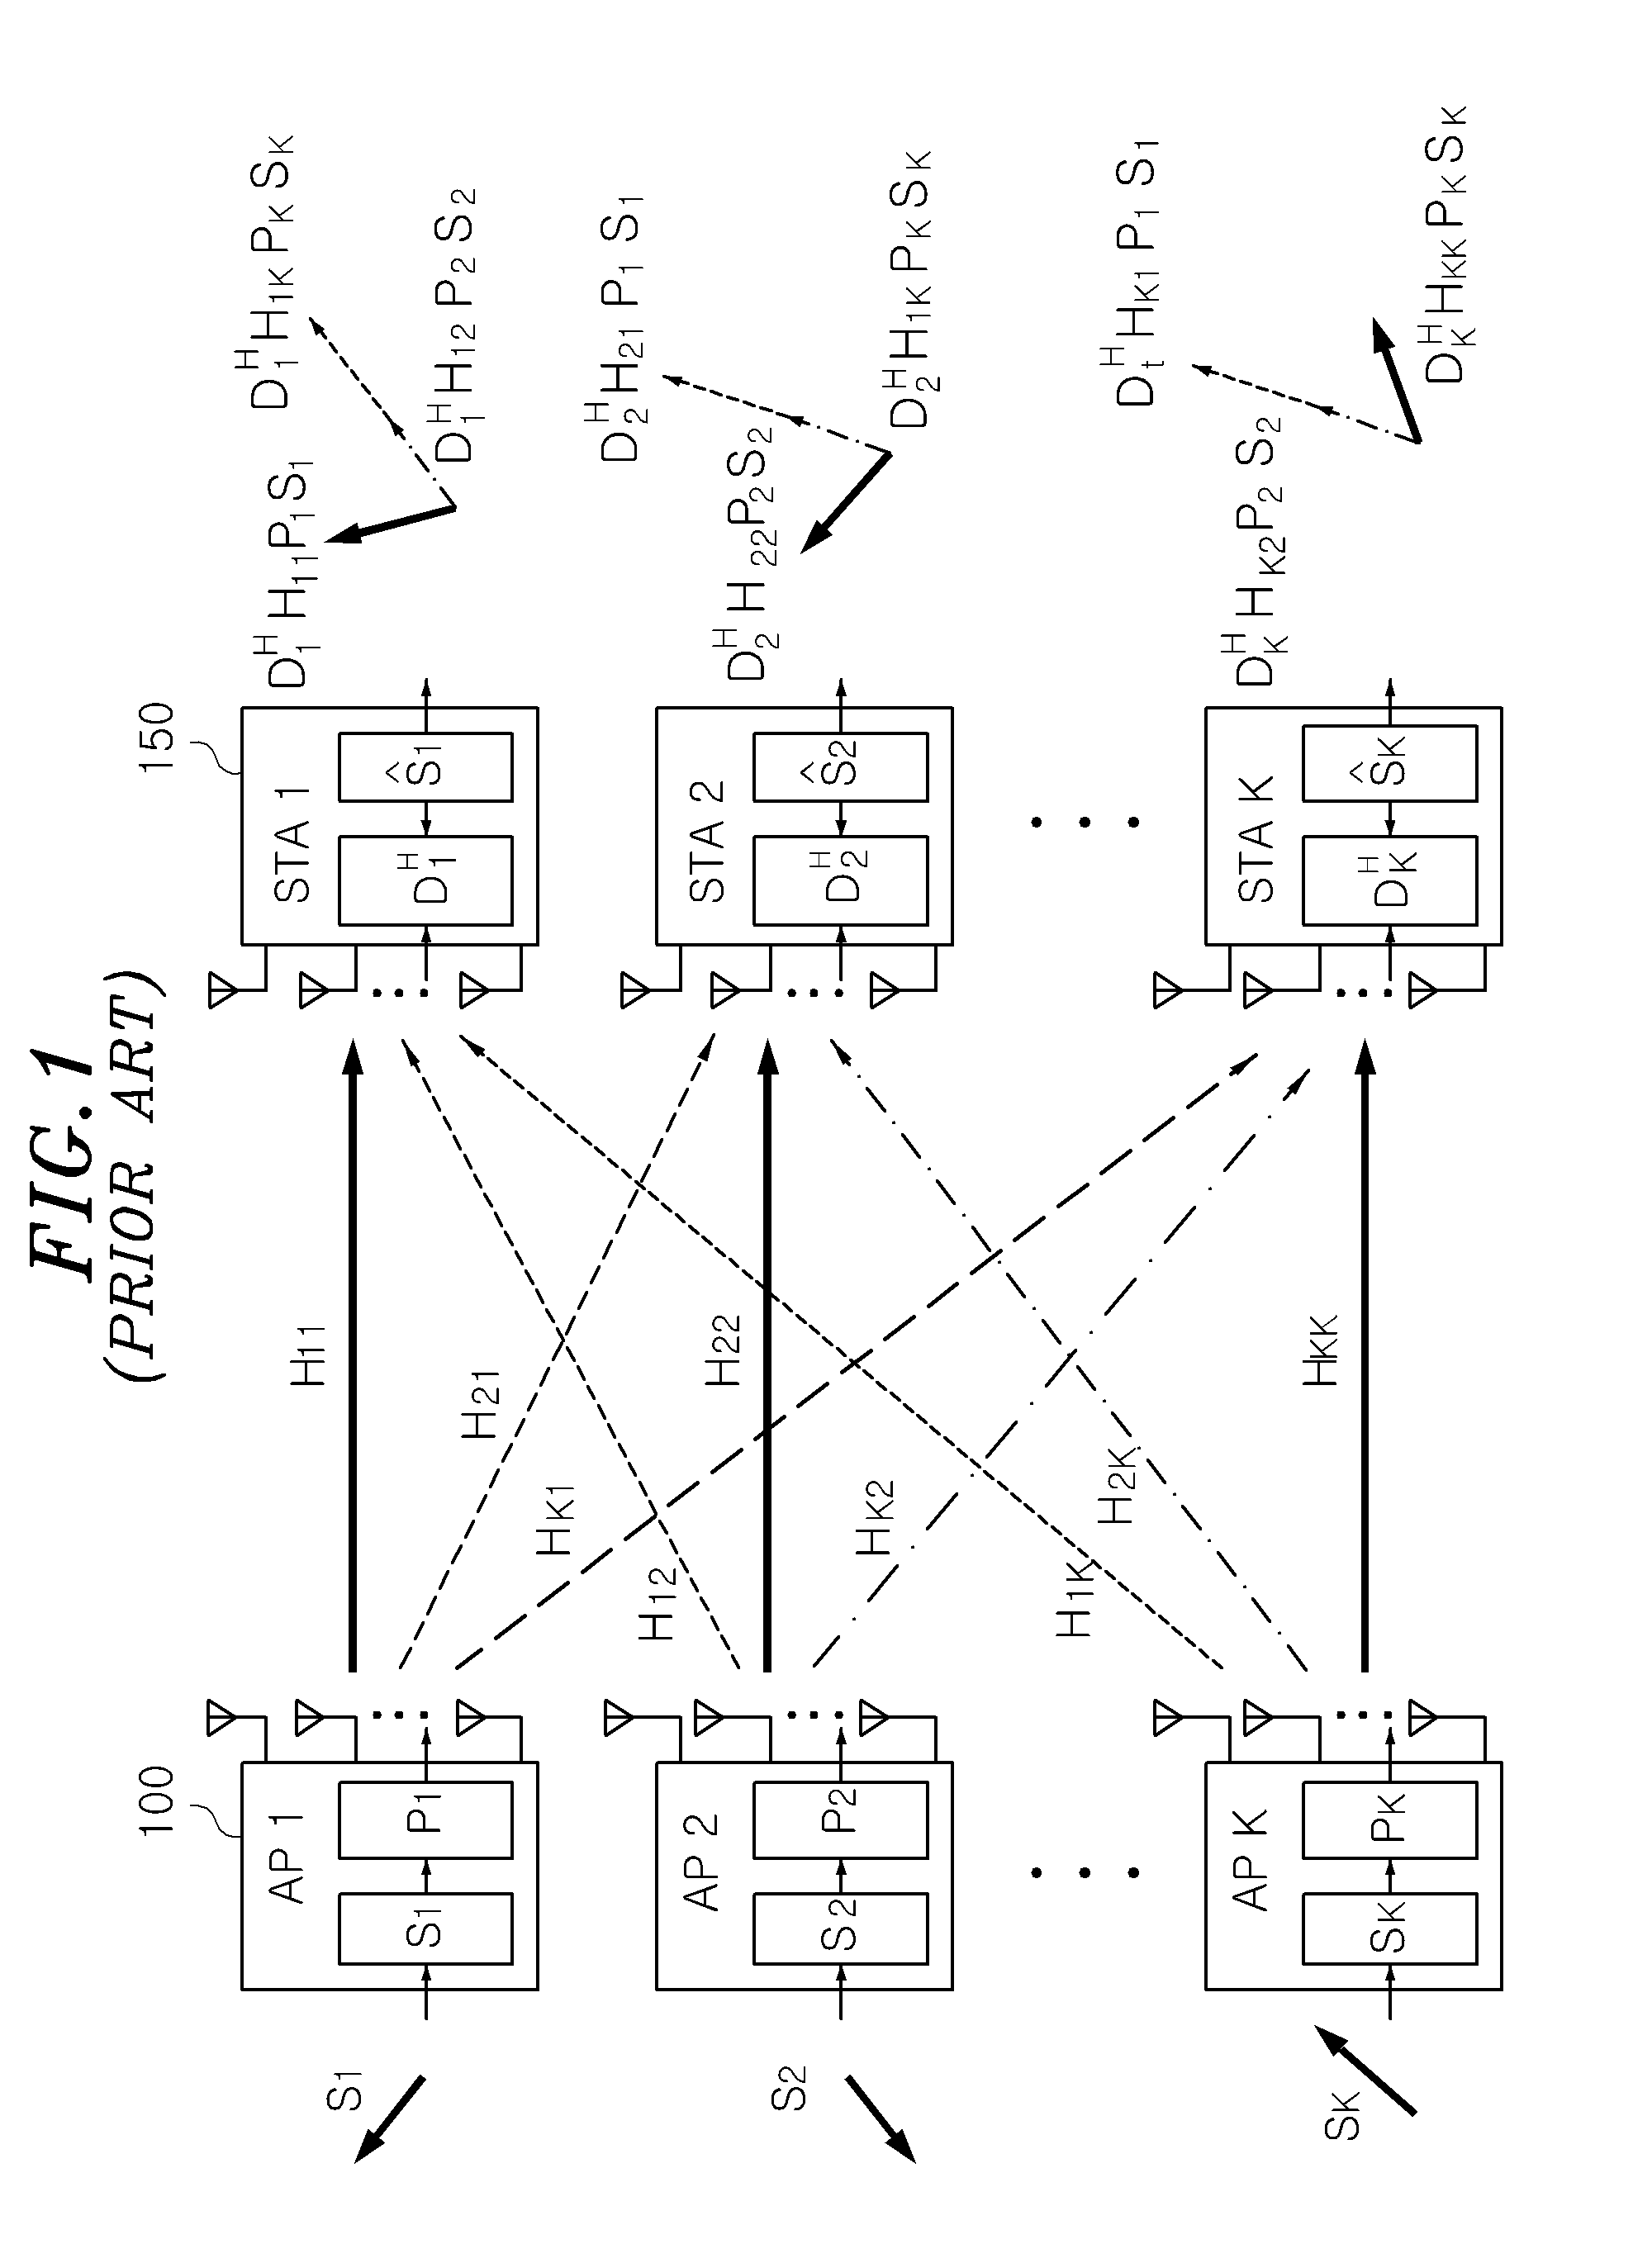 Apparatus and method for partial interference alignment in multi-antenna communication system